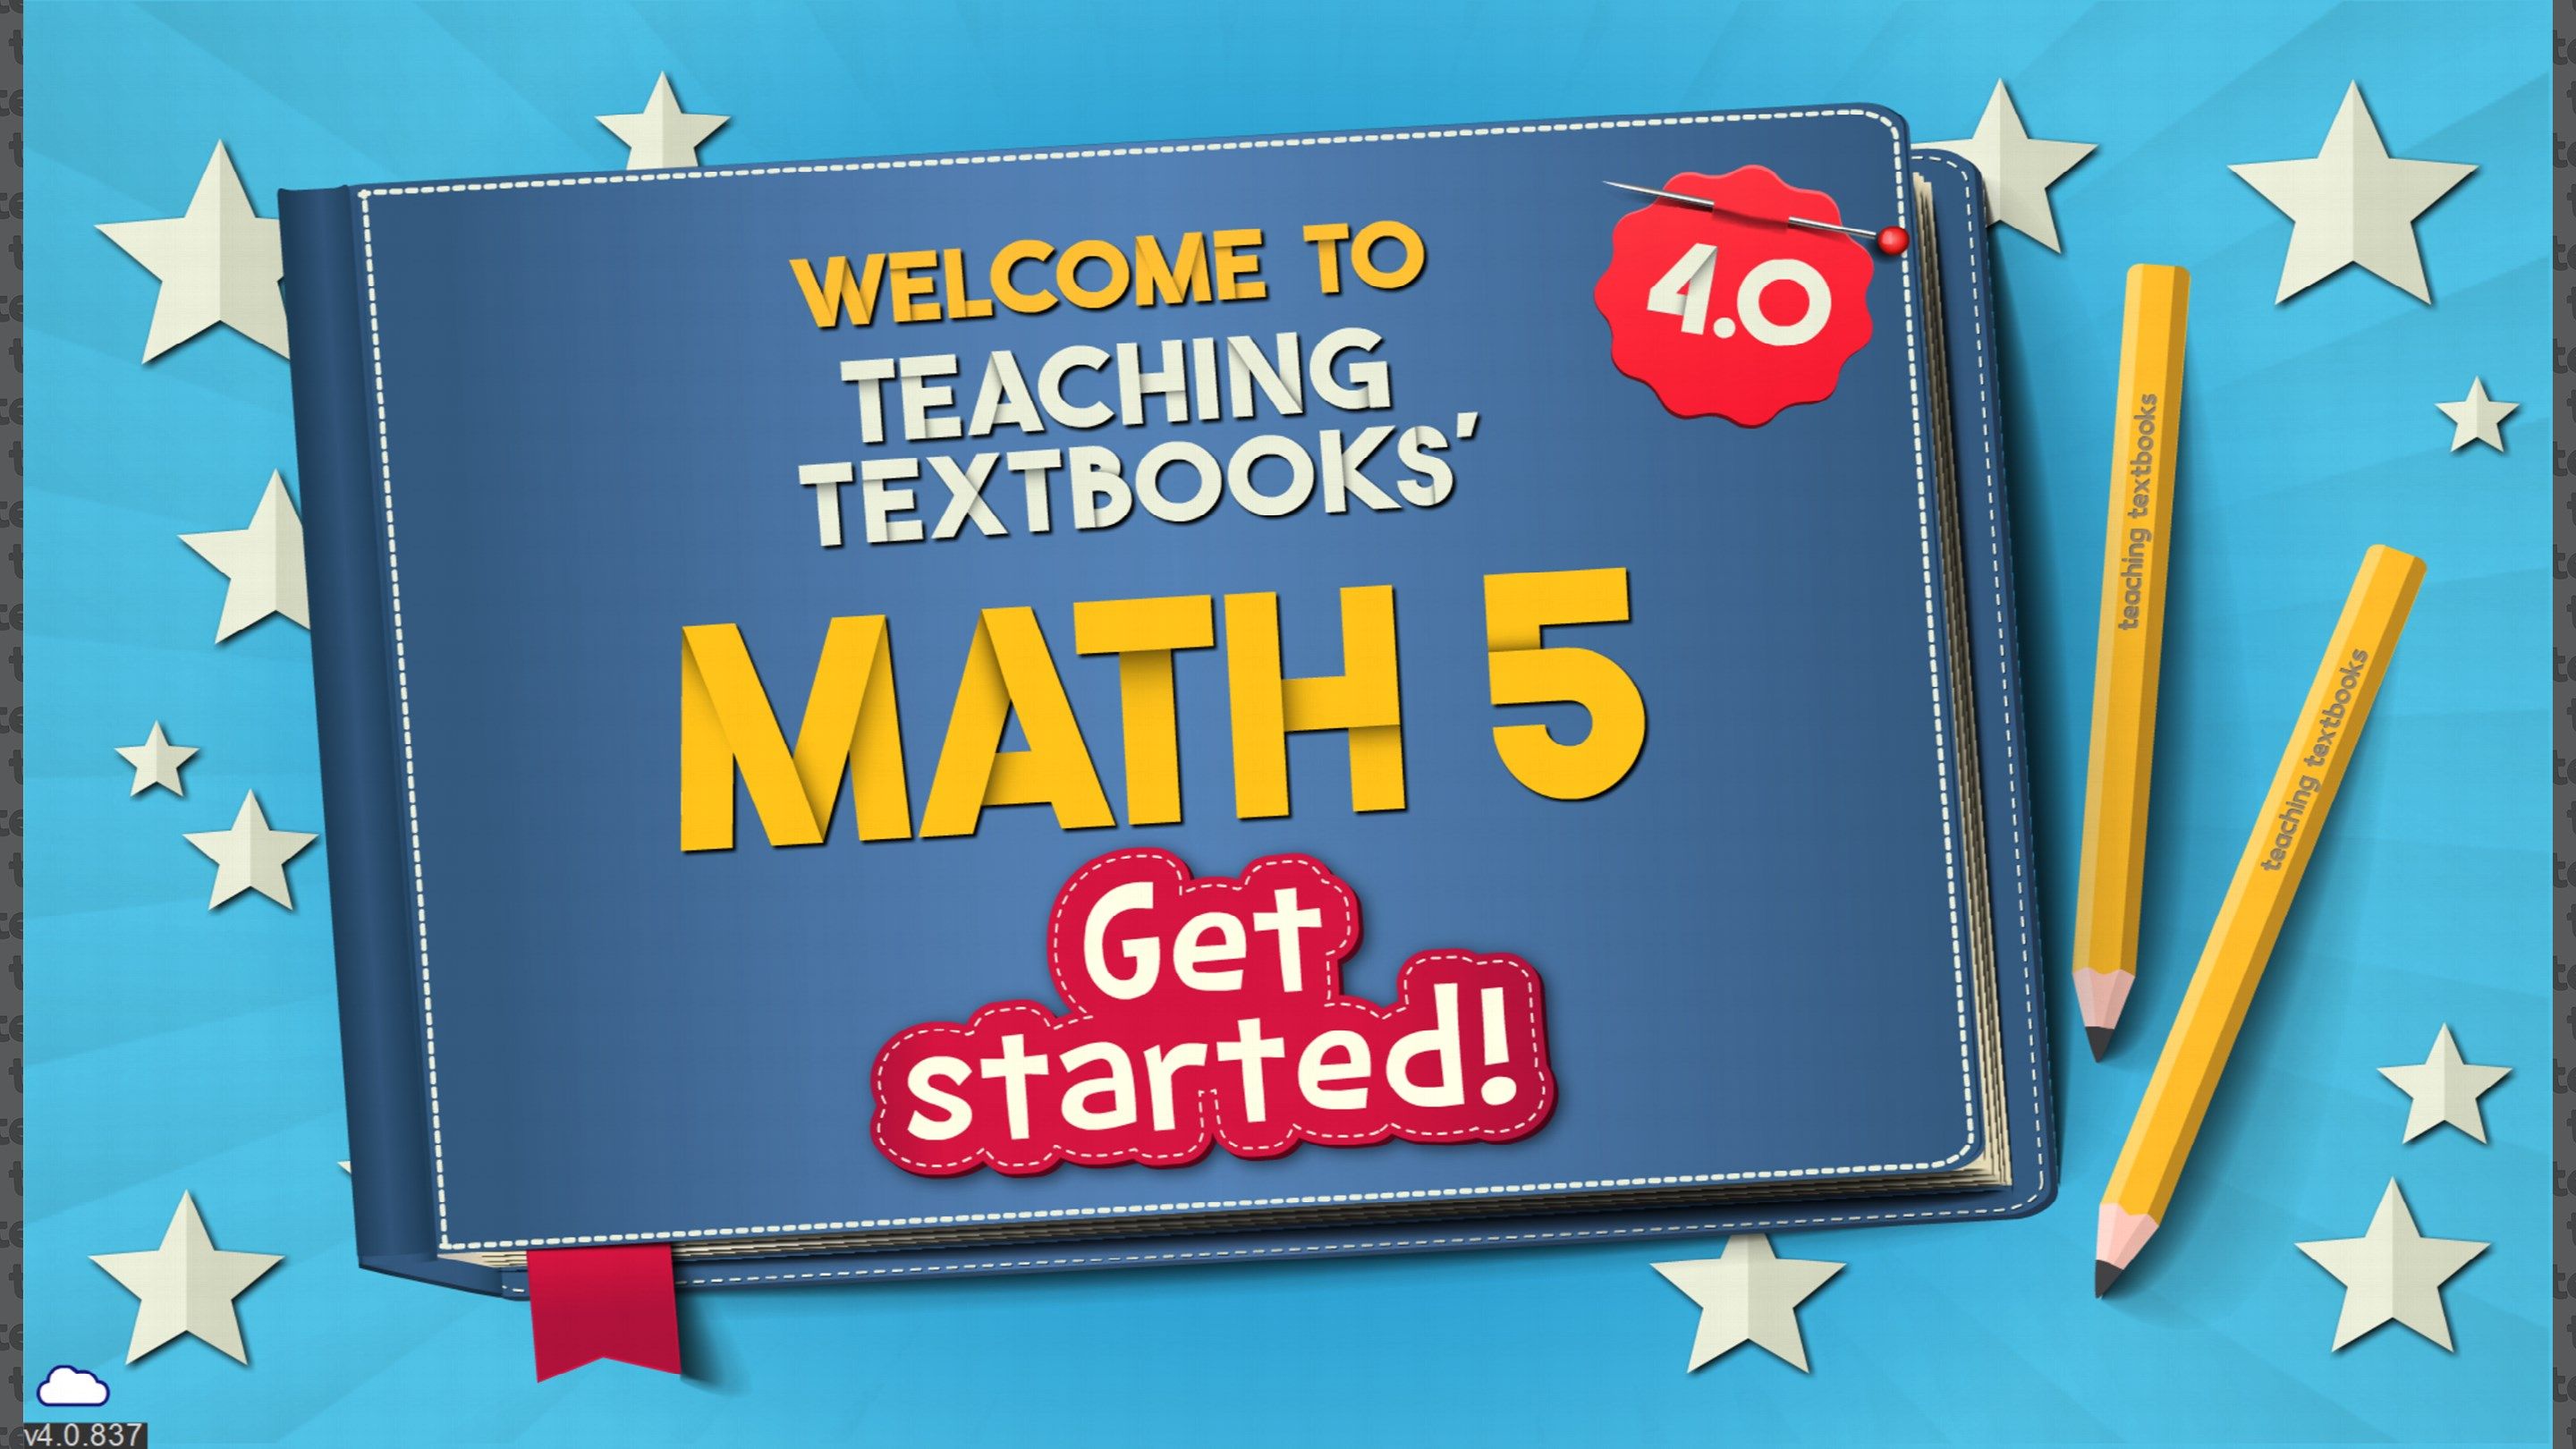 When the app launches, all you have to do to get started is log in with your Teaching Textbooks parent account, and it will connect to your Math 5 enrollment.